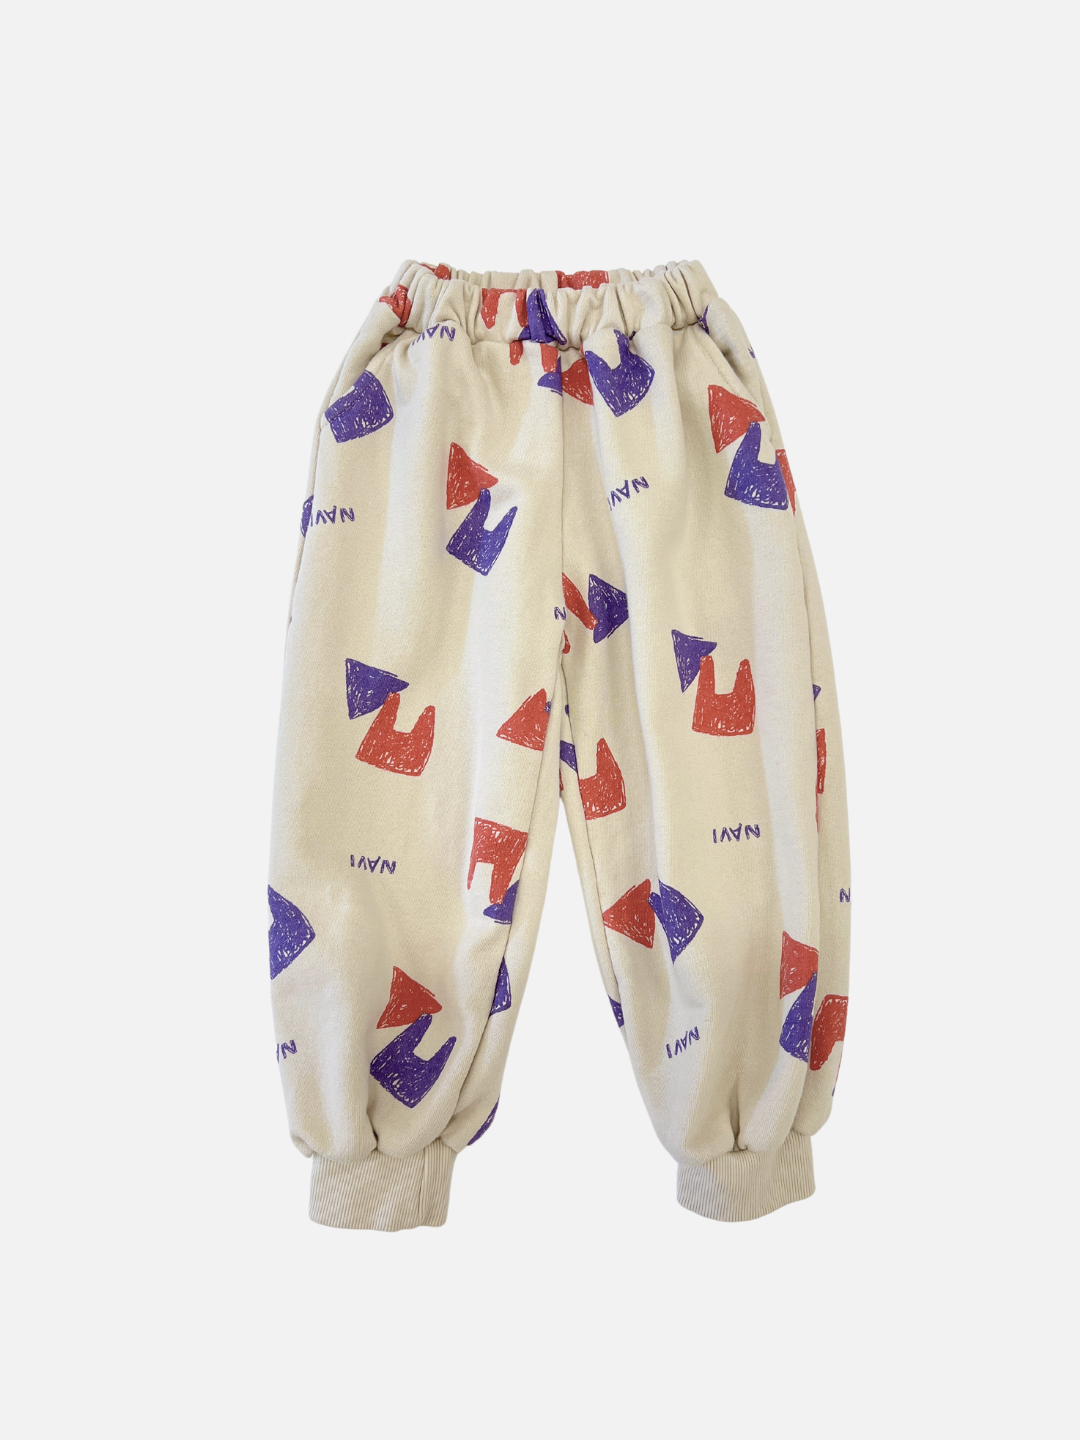 Oatmeal | Front view of kids beige sweatpants with an all over pattern of red and purple shapes and the brand name Navi.